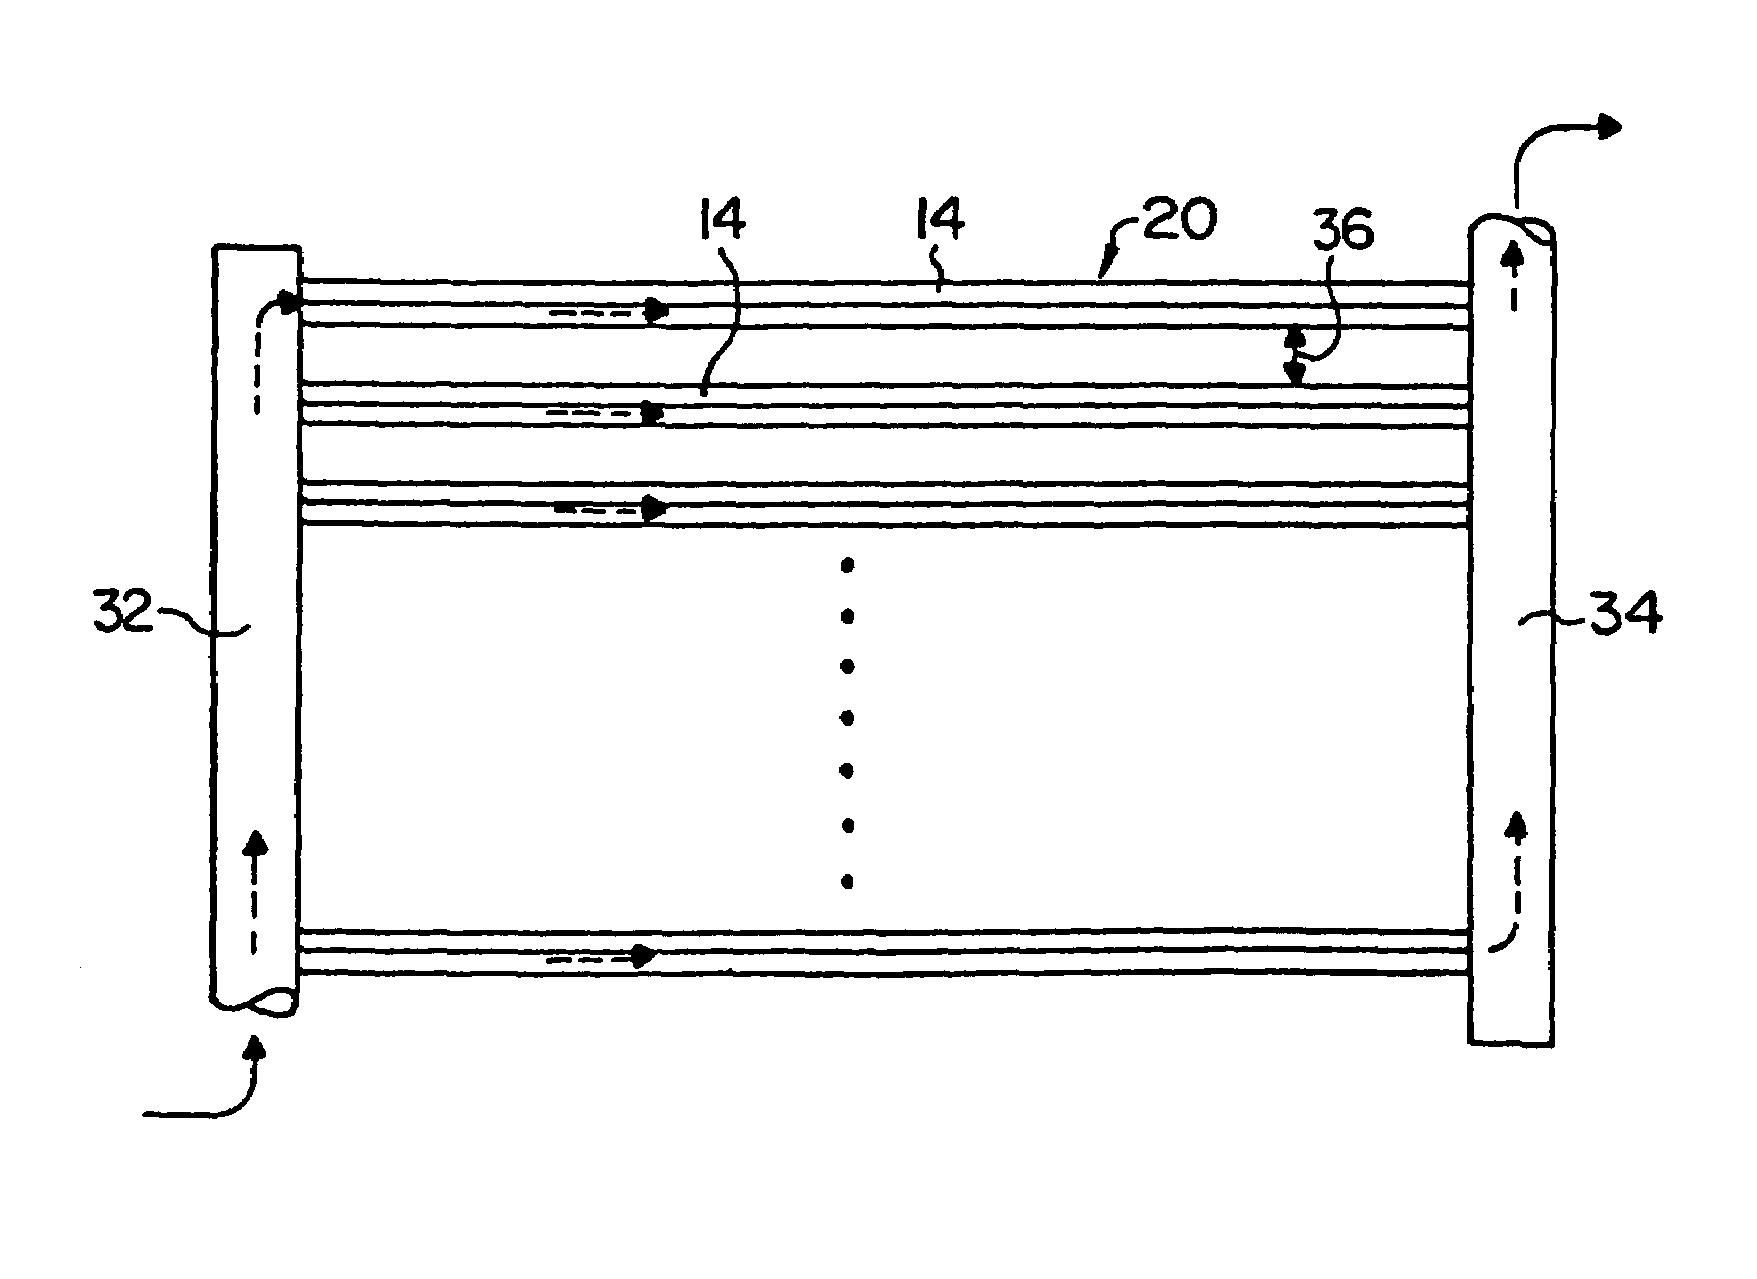 Adsorber generator for use in sorption heat pump processes